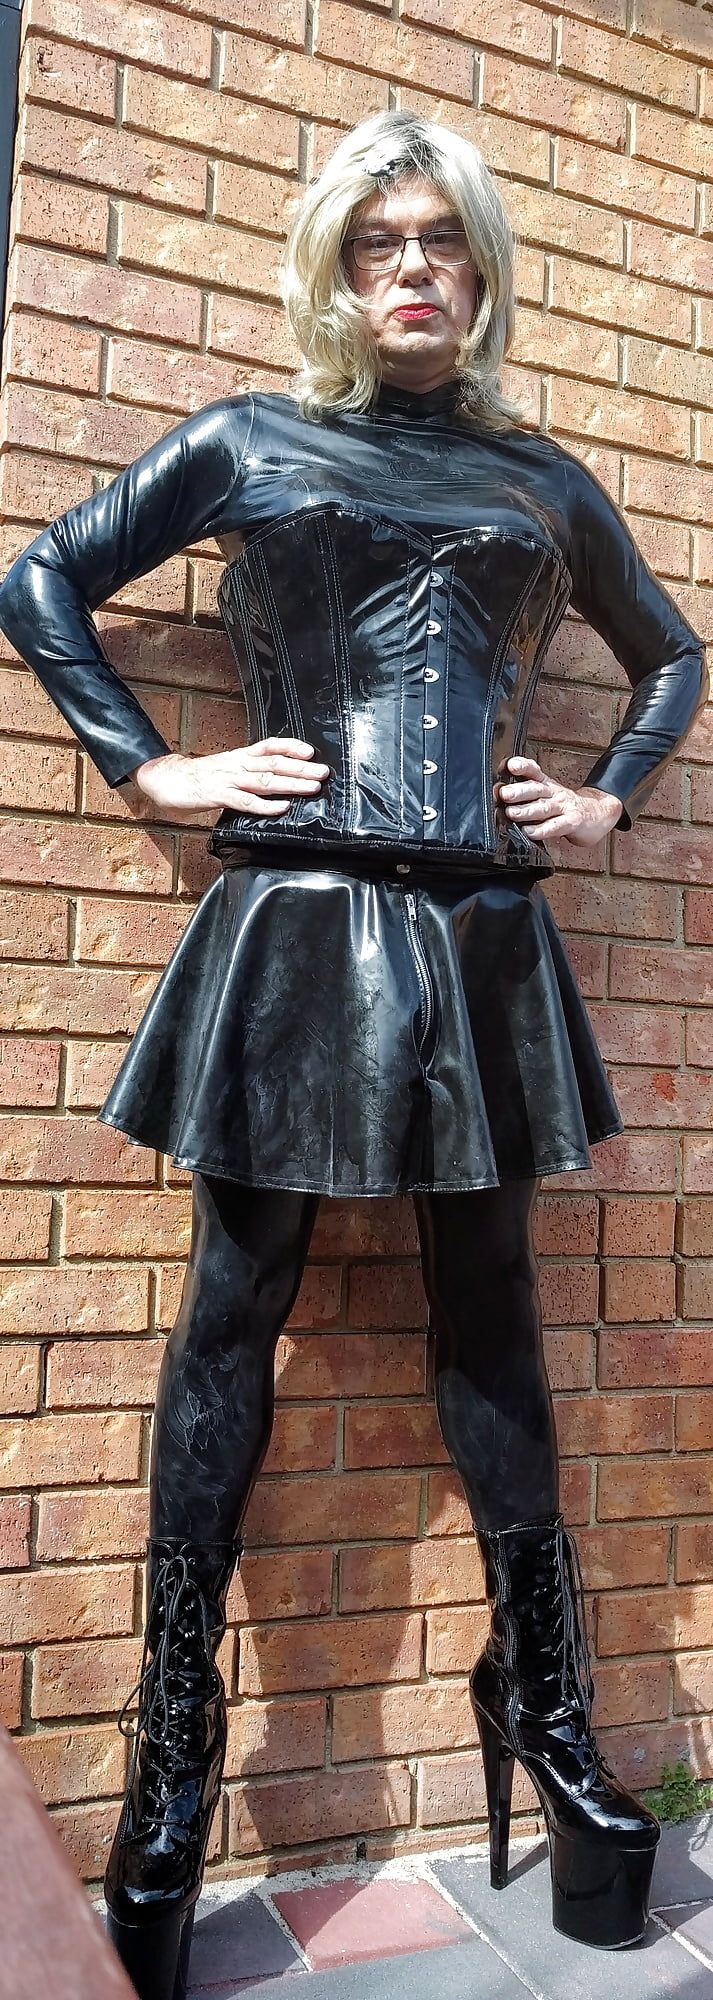 Warm day for latex